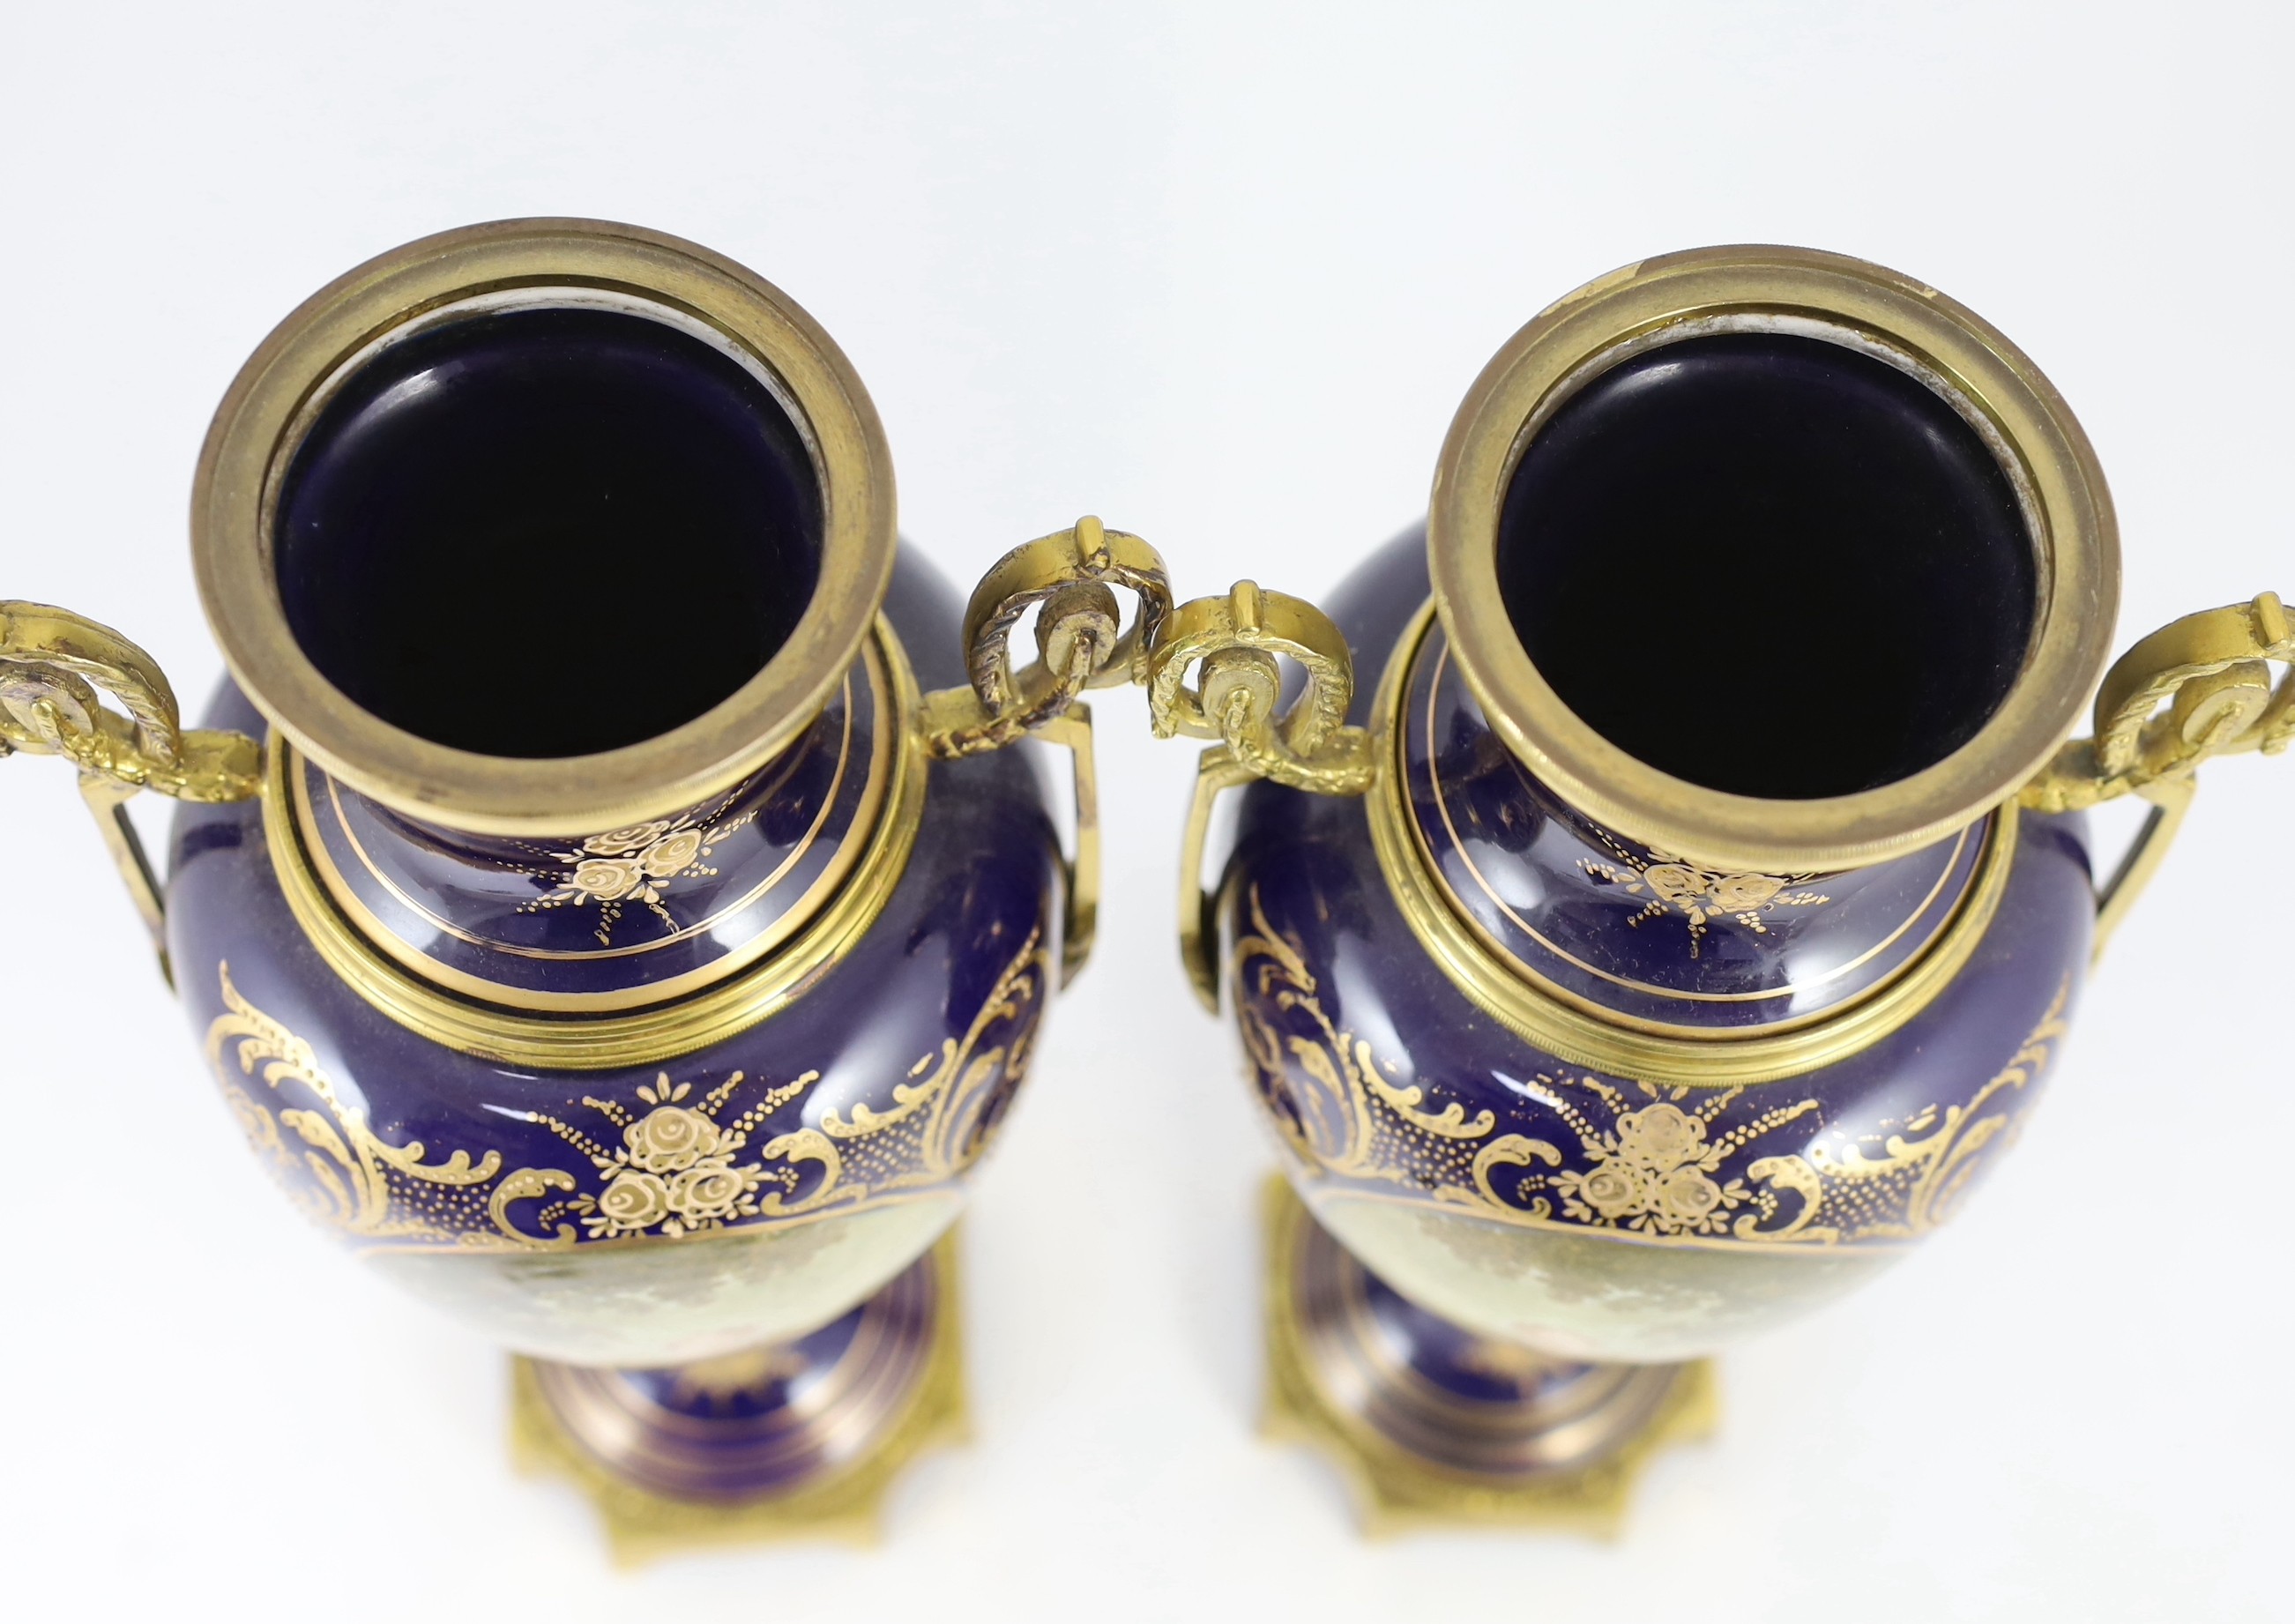 A pair of Sevres style porcelain and ormolu mounted vases, late 20th century, 49 cm high